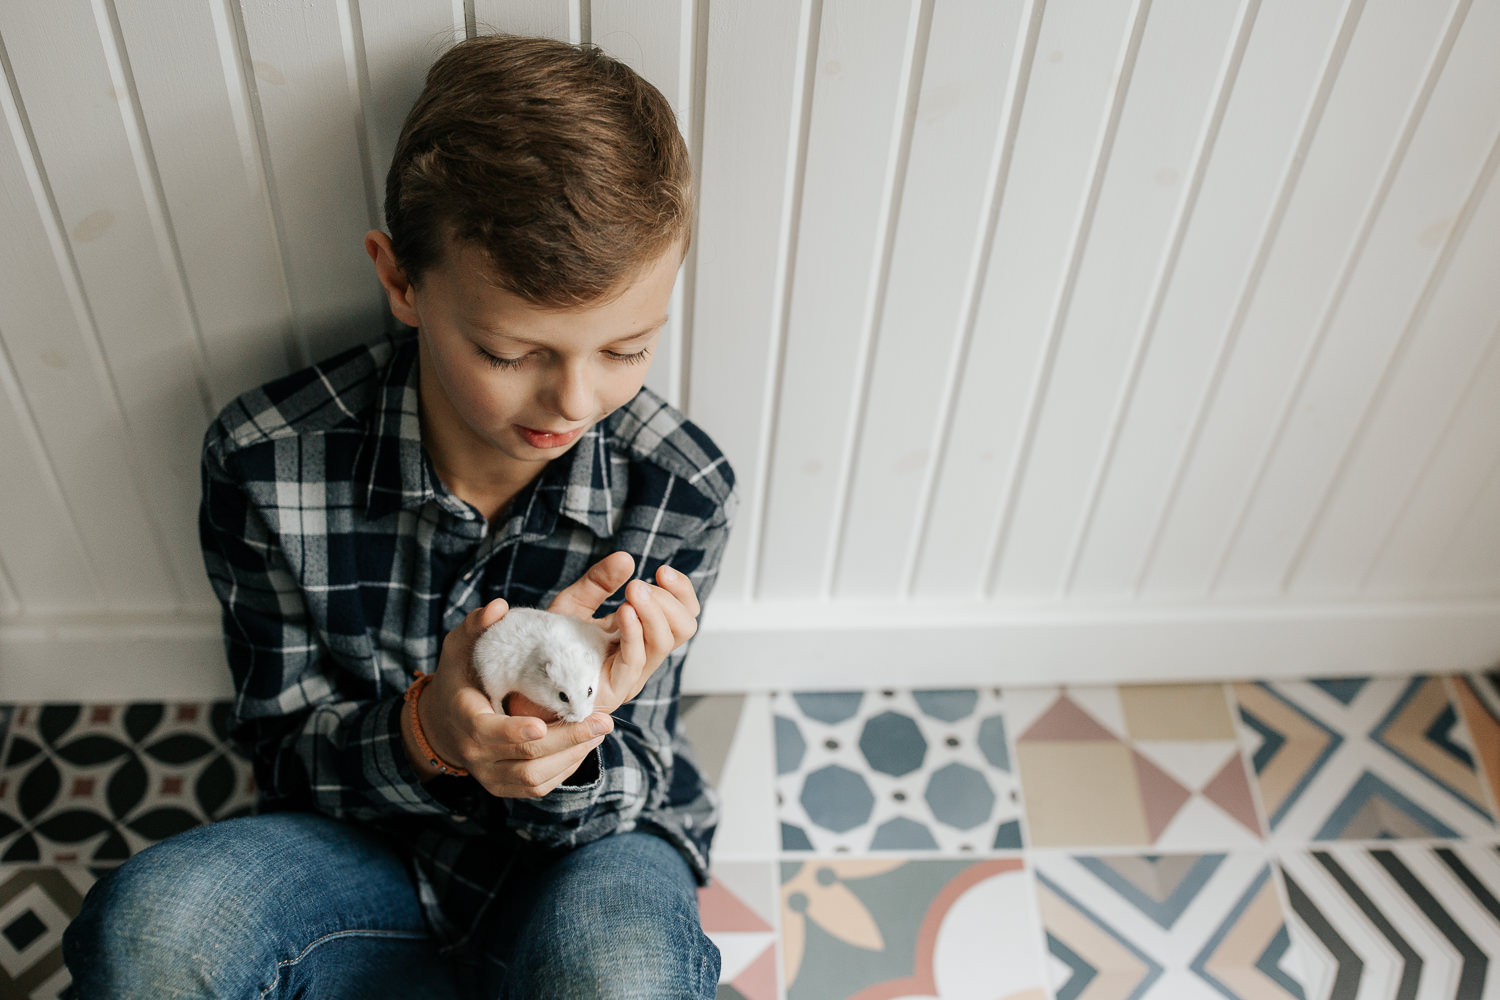 9 year old boy in plaid shirt with light brown hair sitting on colourful tile floor, leaning against wall, holding and looking at white hamster in his hands - Stouffville In-Home Photography